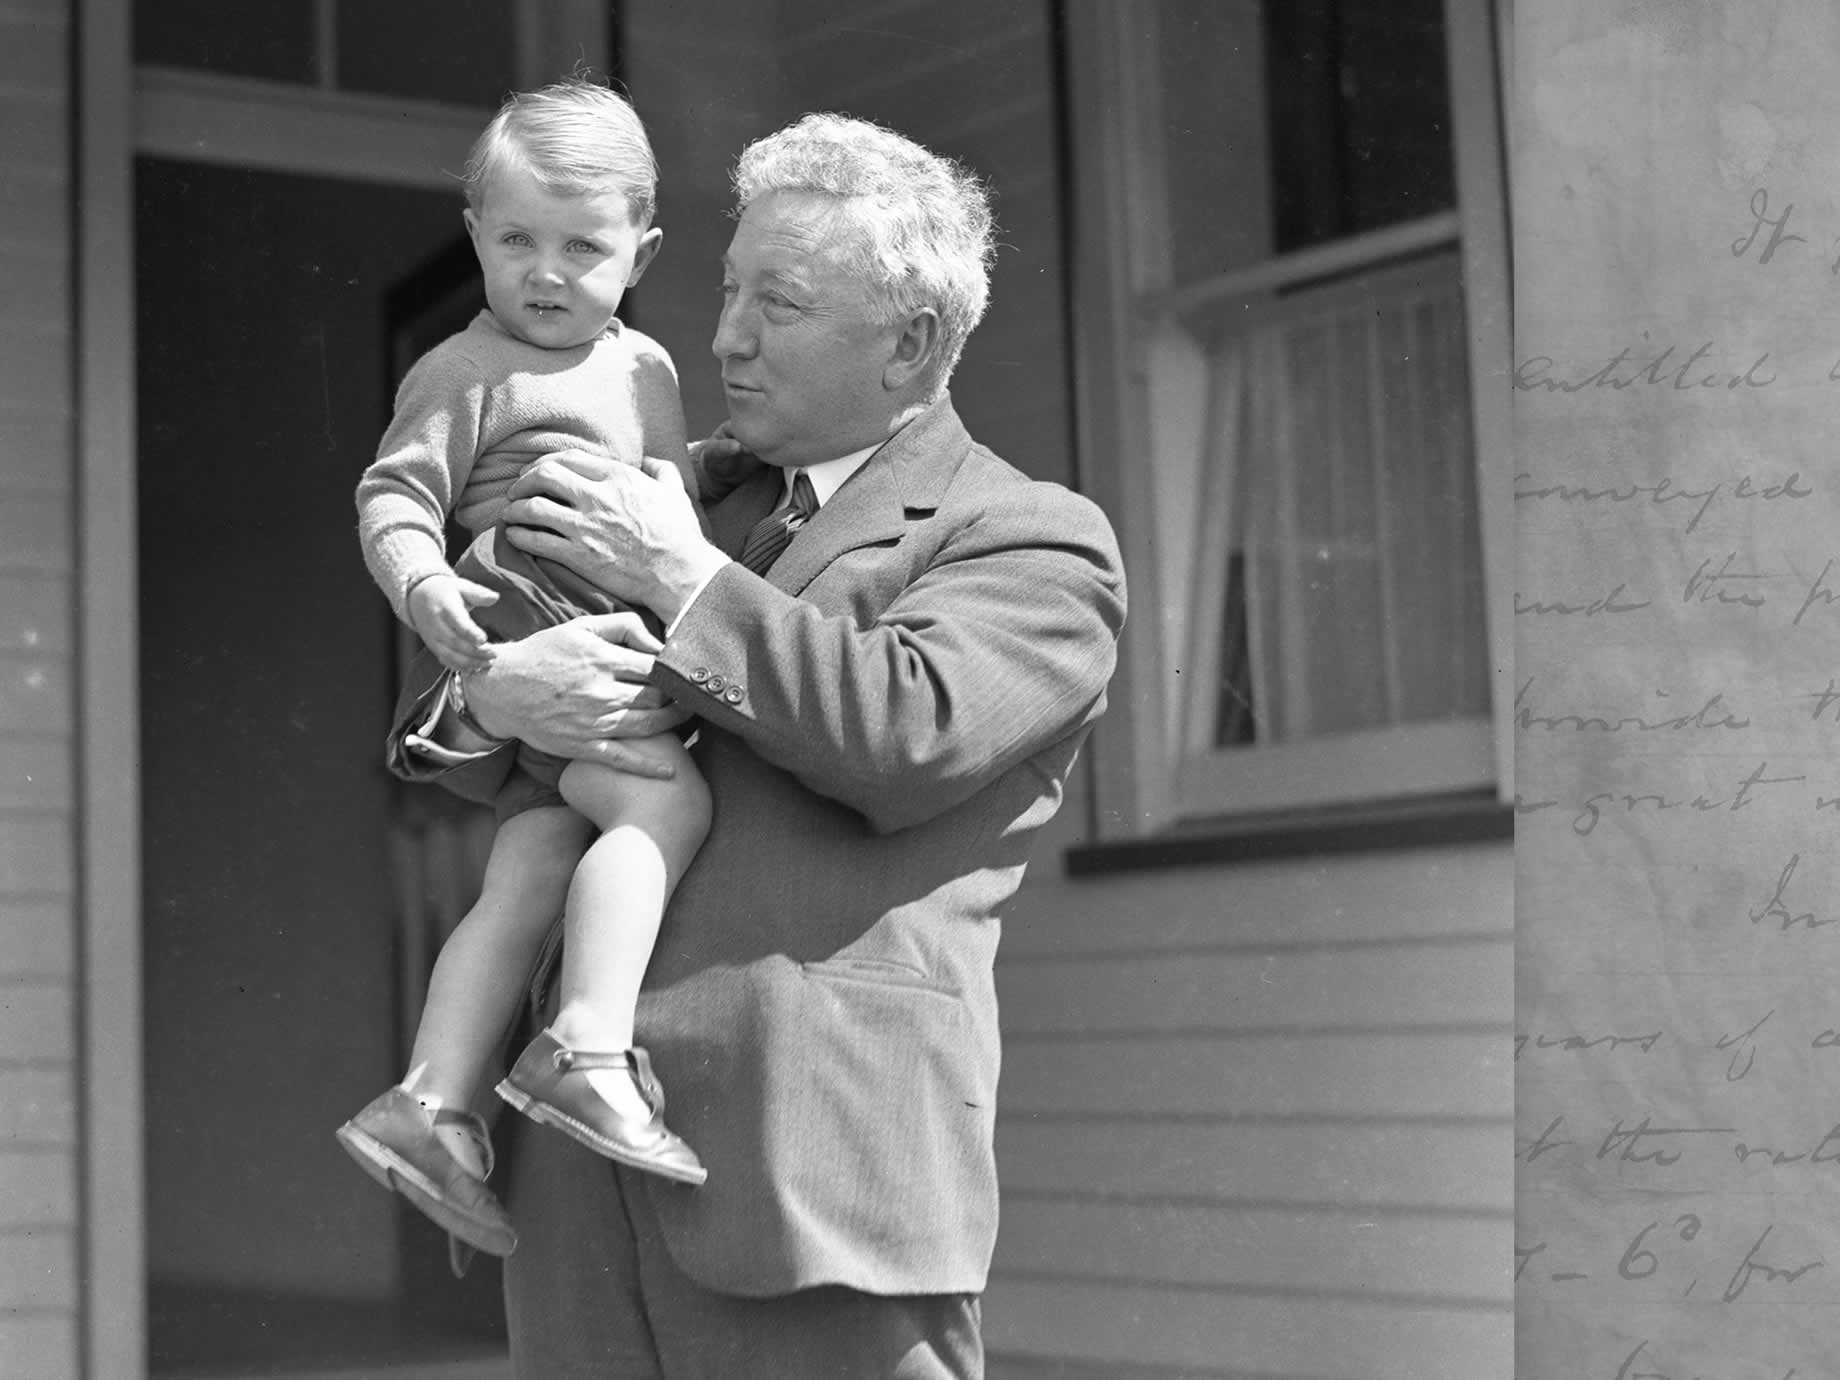 Joe Lyons outside the back door of his home with a young child in the mid 1920s